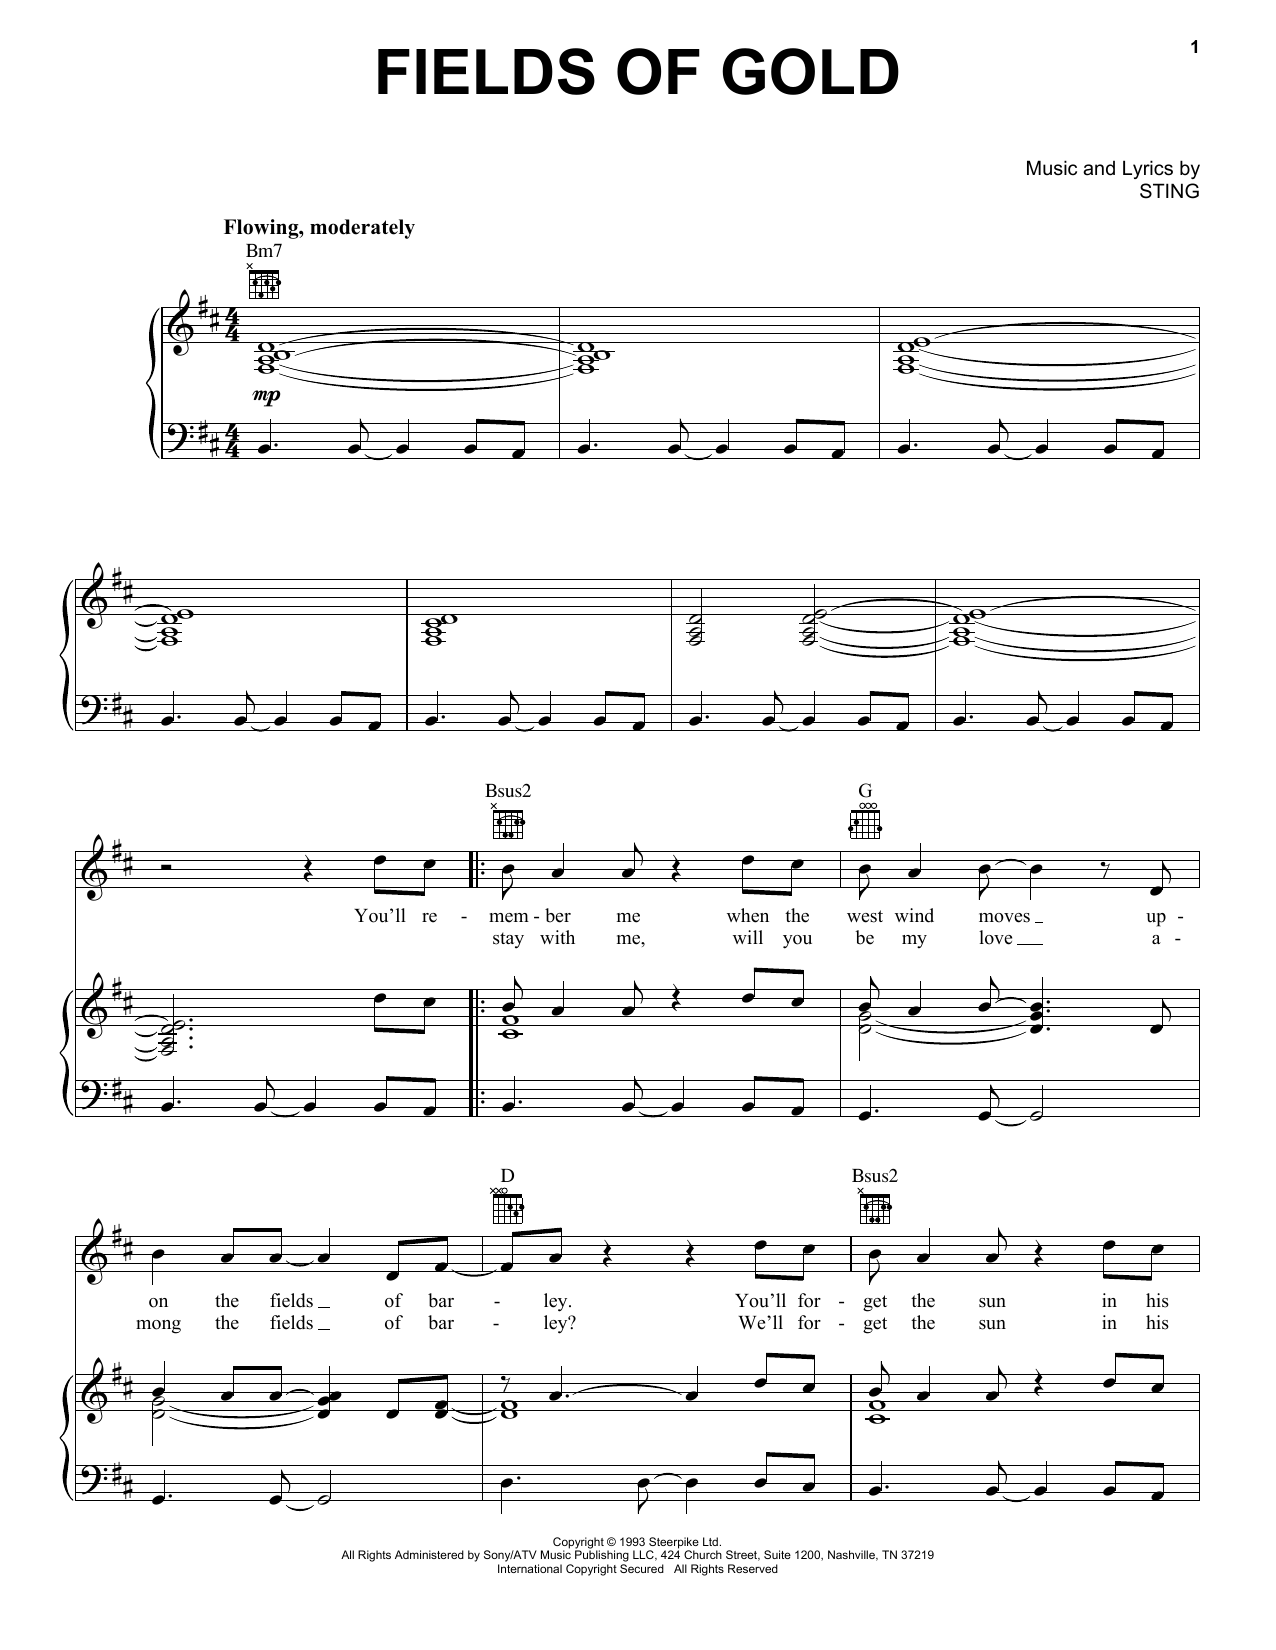 Sting Fields Of Gold sheet music preview music notes and score for Guitar including 3 page(s)